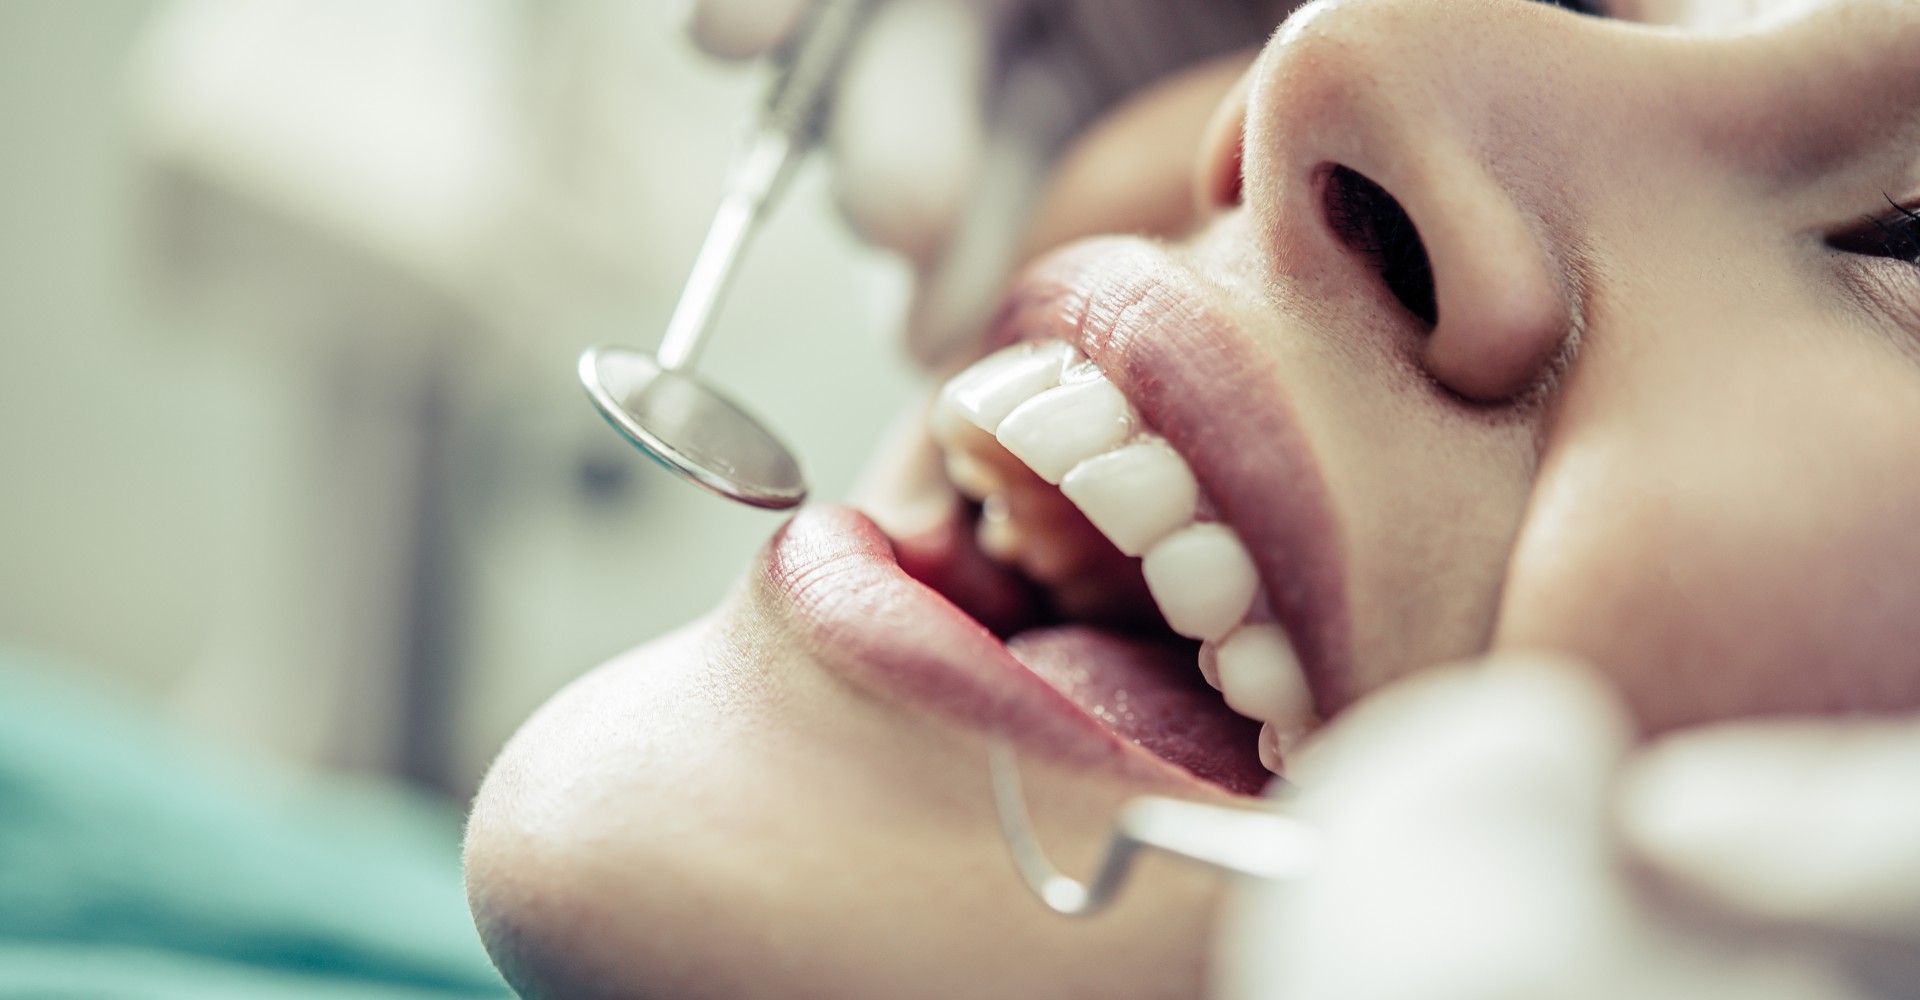 Do You Need to Prepare before Going to the Dentist?